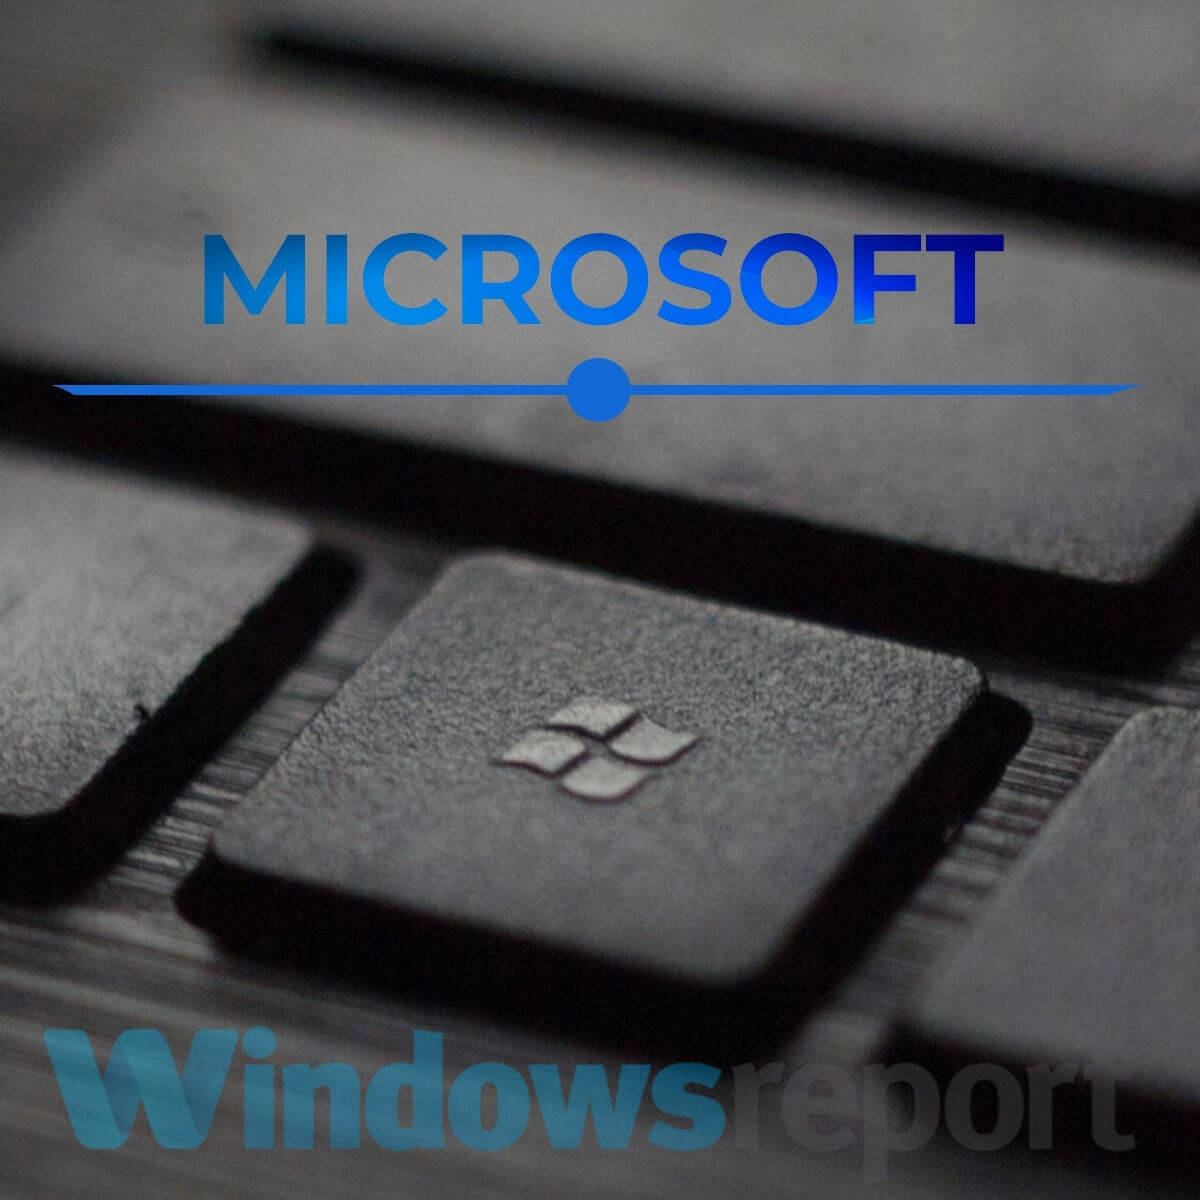 download windows 10 20h1 ISO file